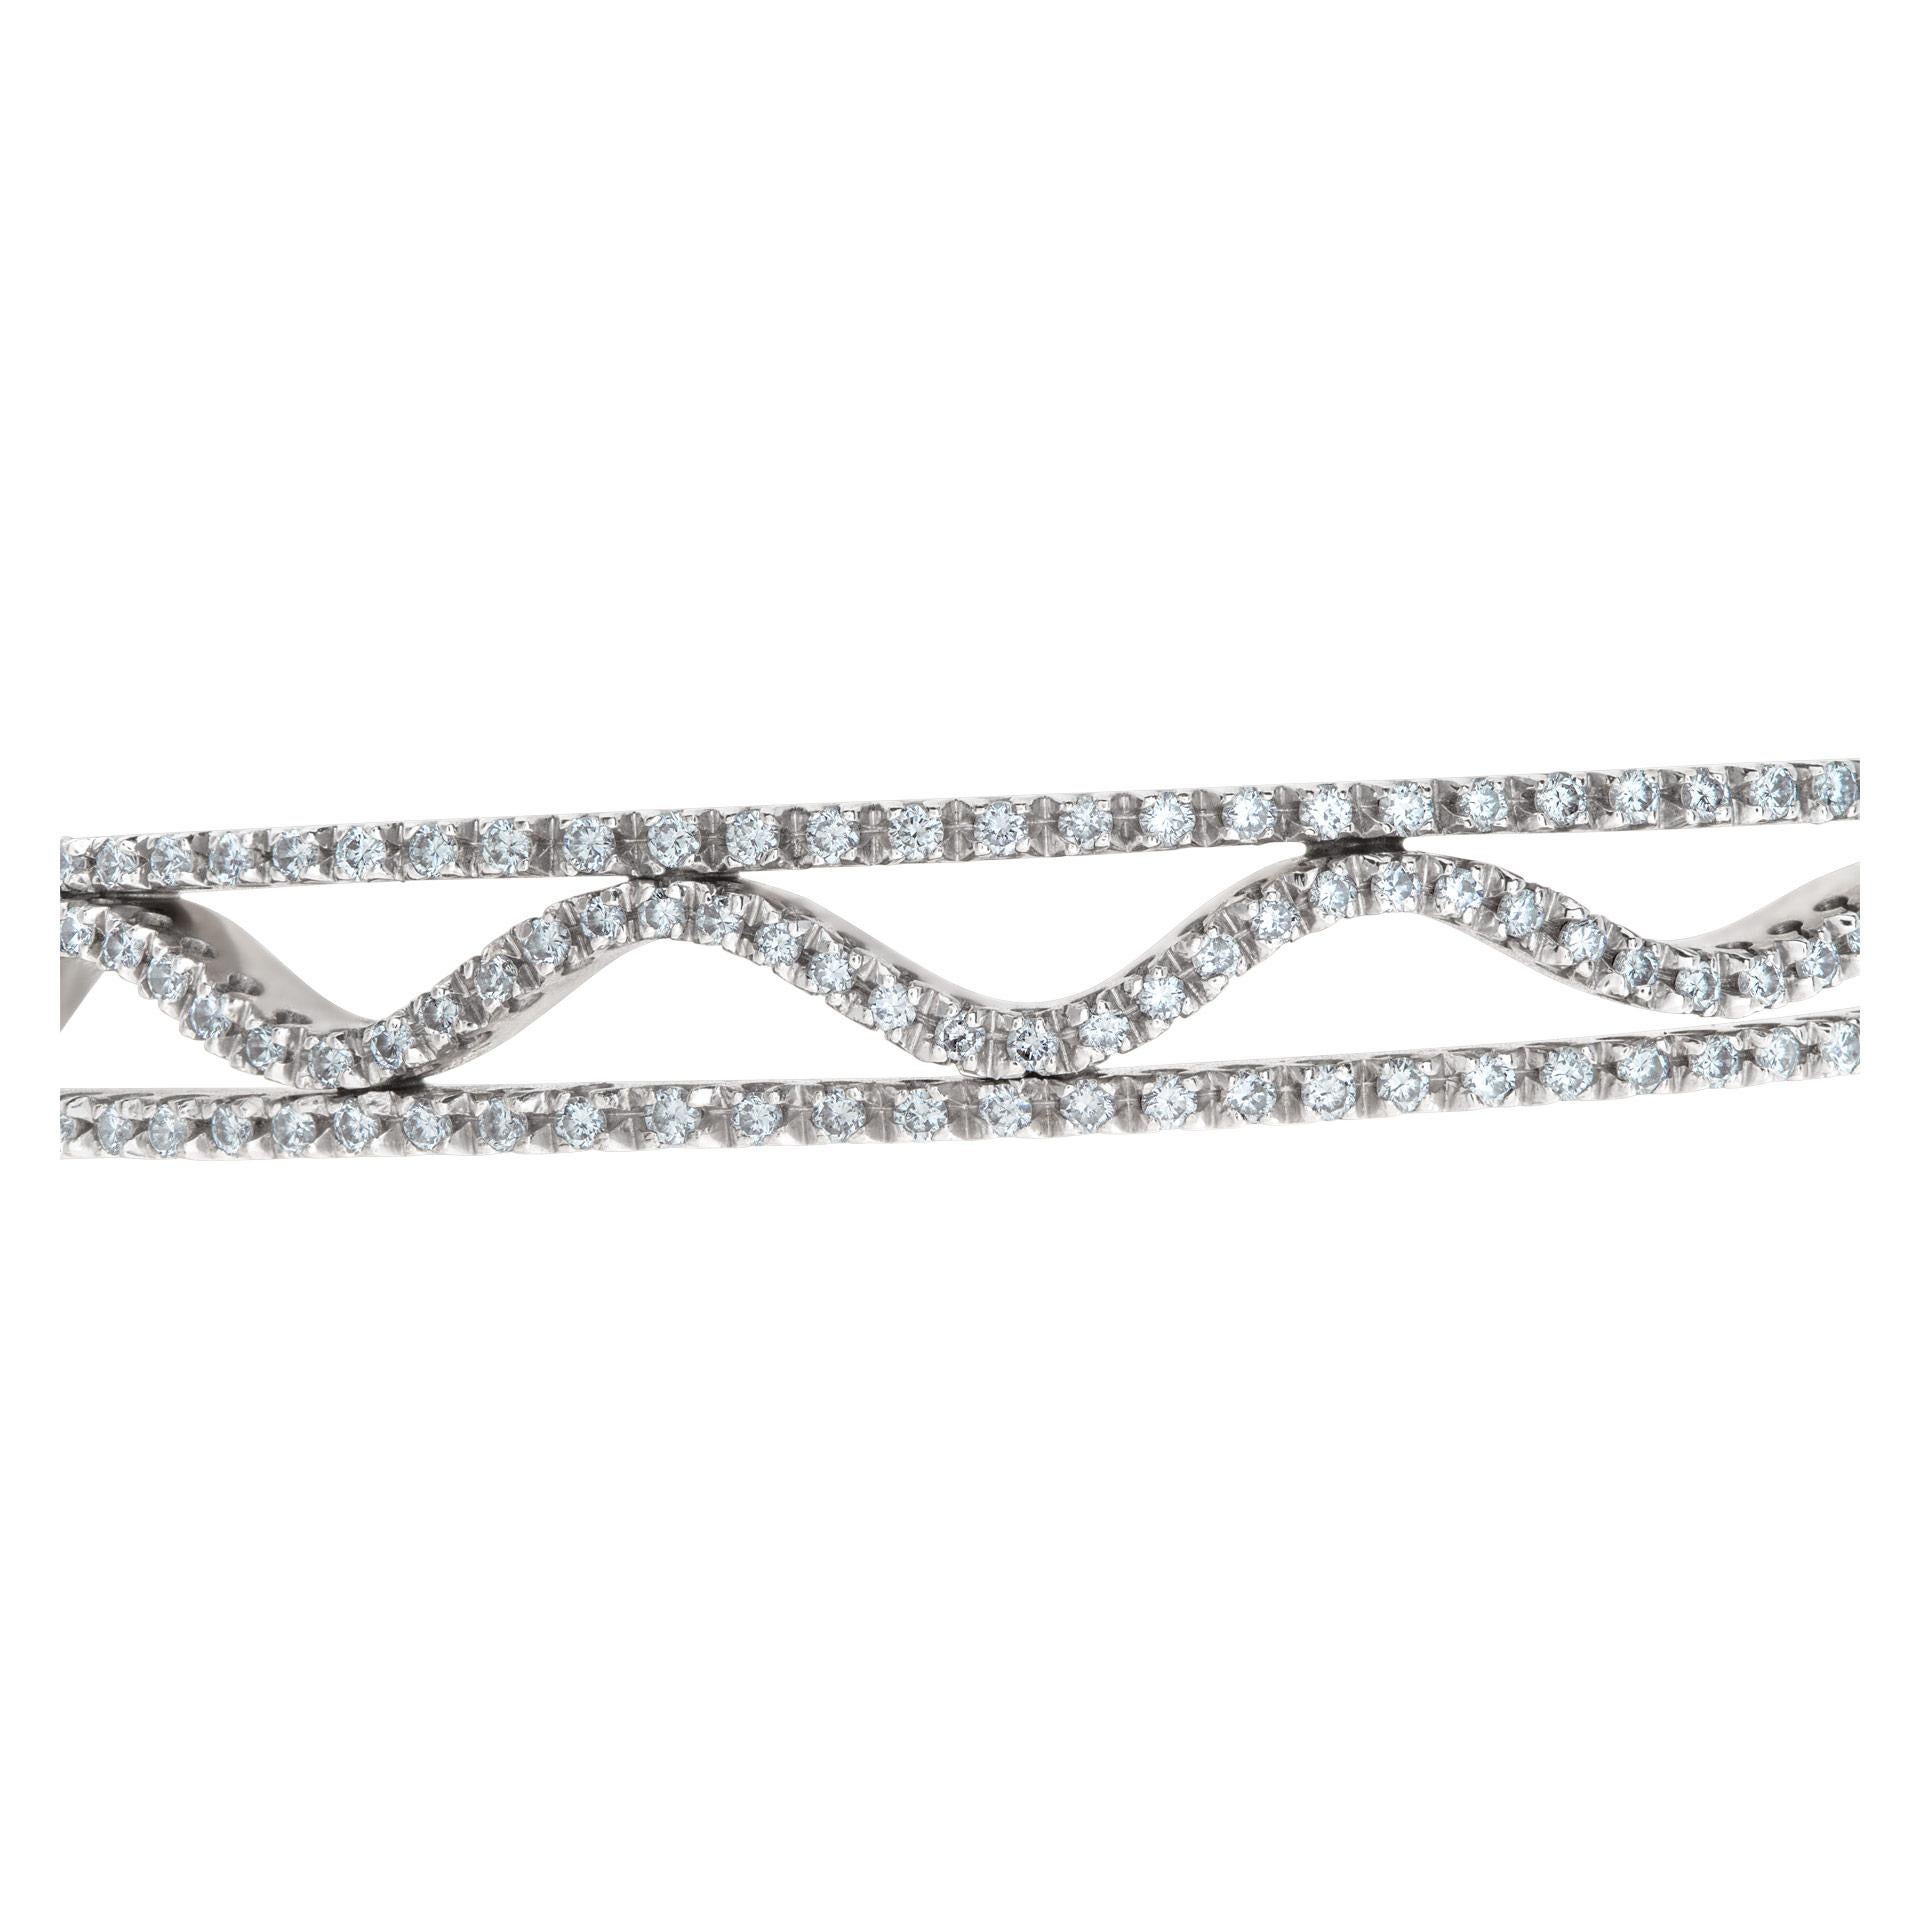 Gorgeous diamond wave bangle with approximately 2 carats in diamonds in 14k white gold. Fits 6